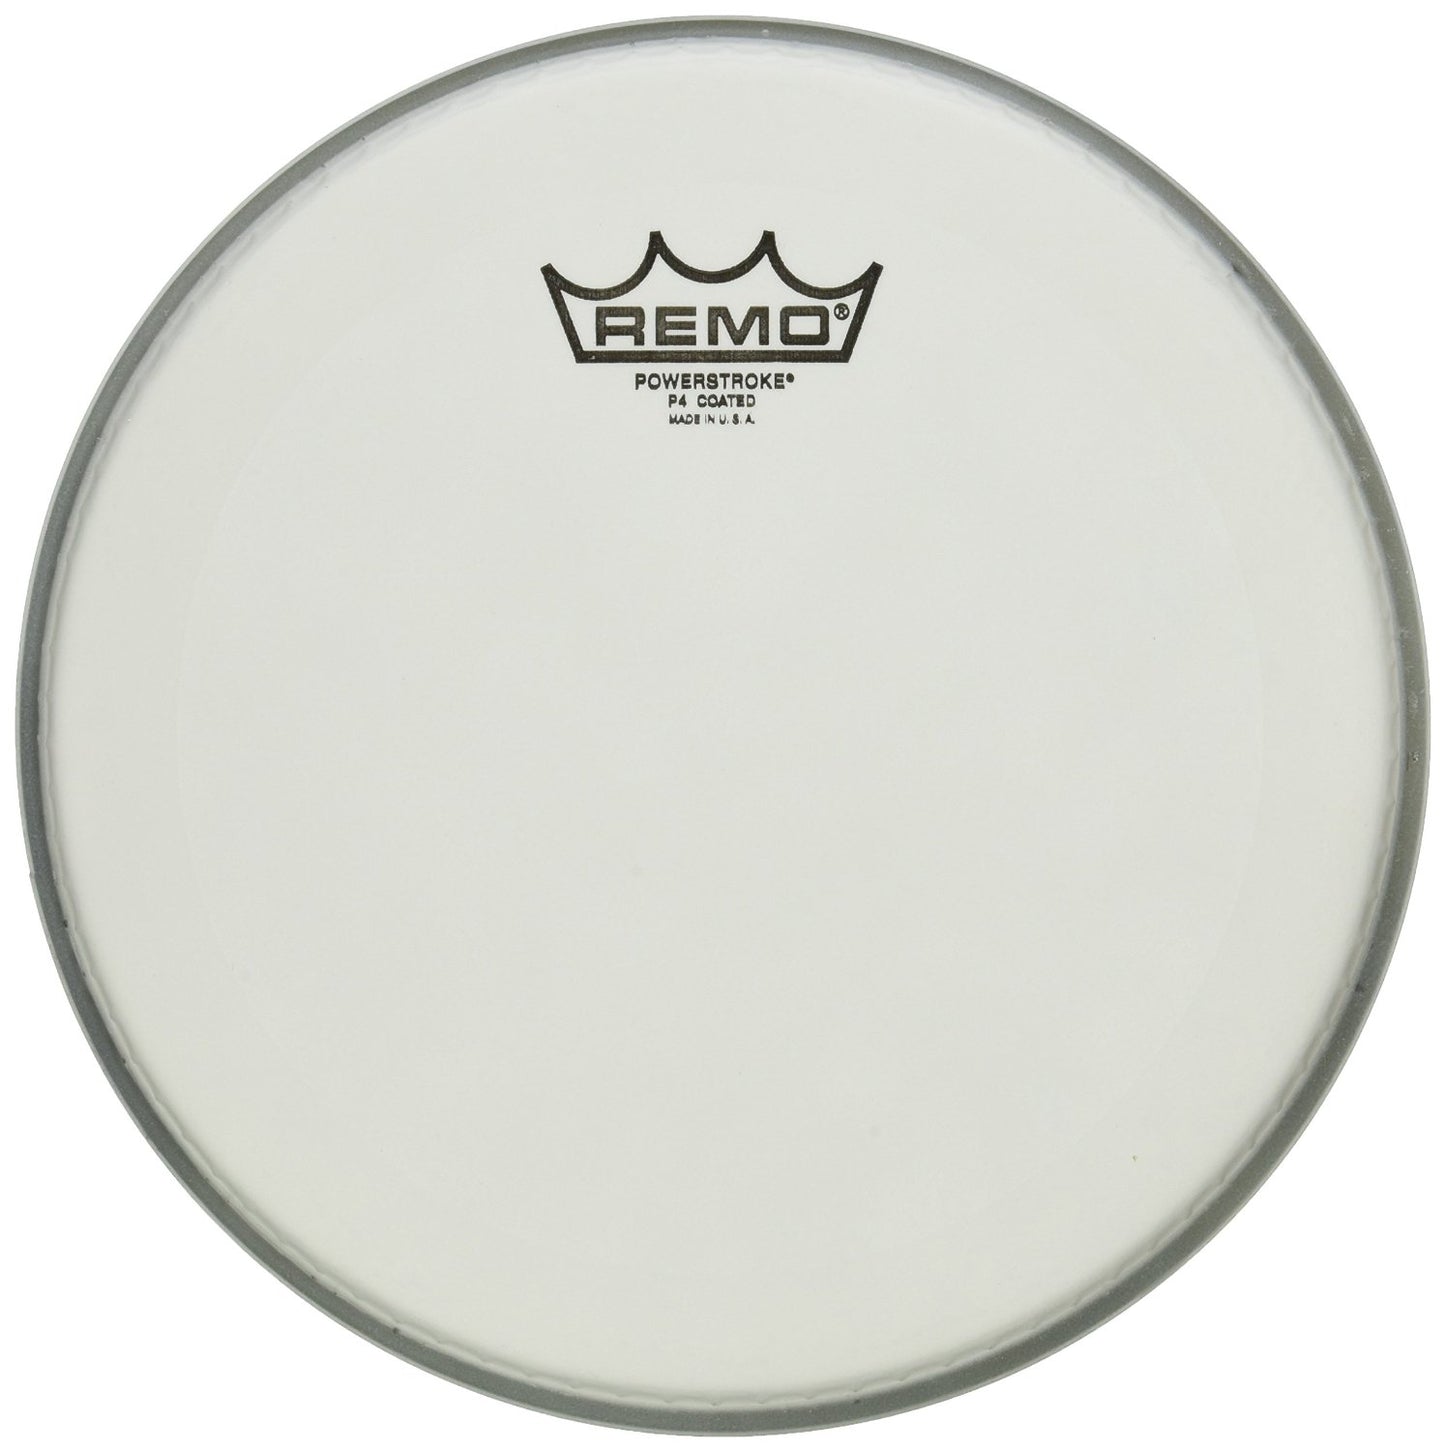 Remo Powerstroke P4 Coated Drumhead, 10"